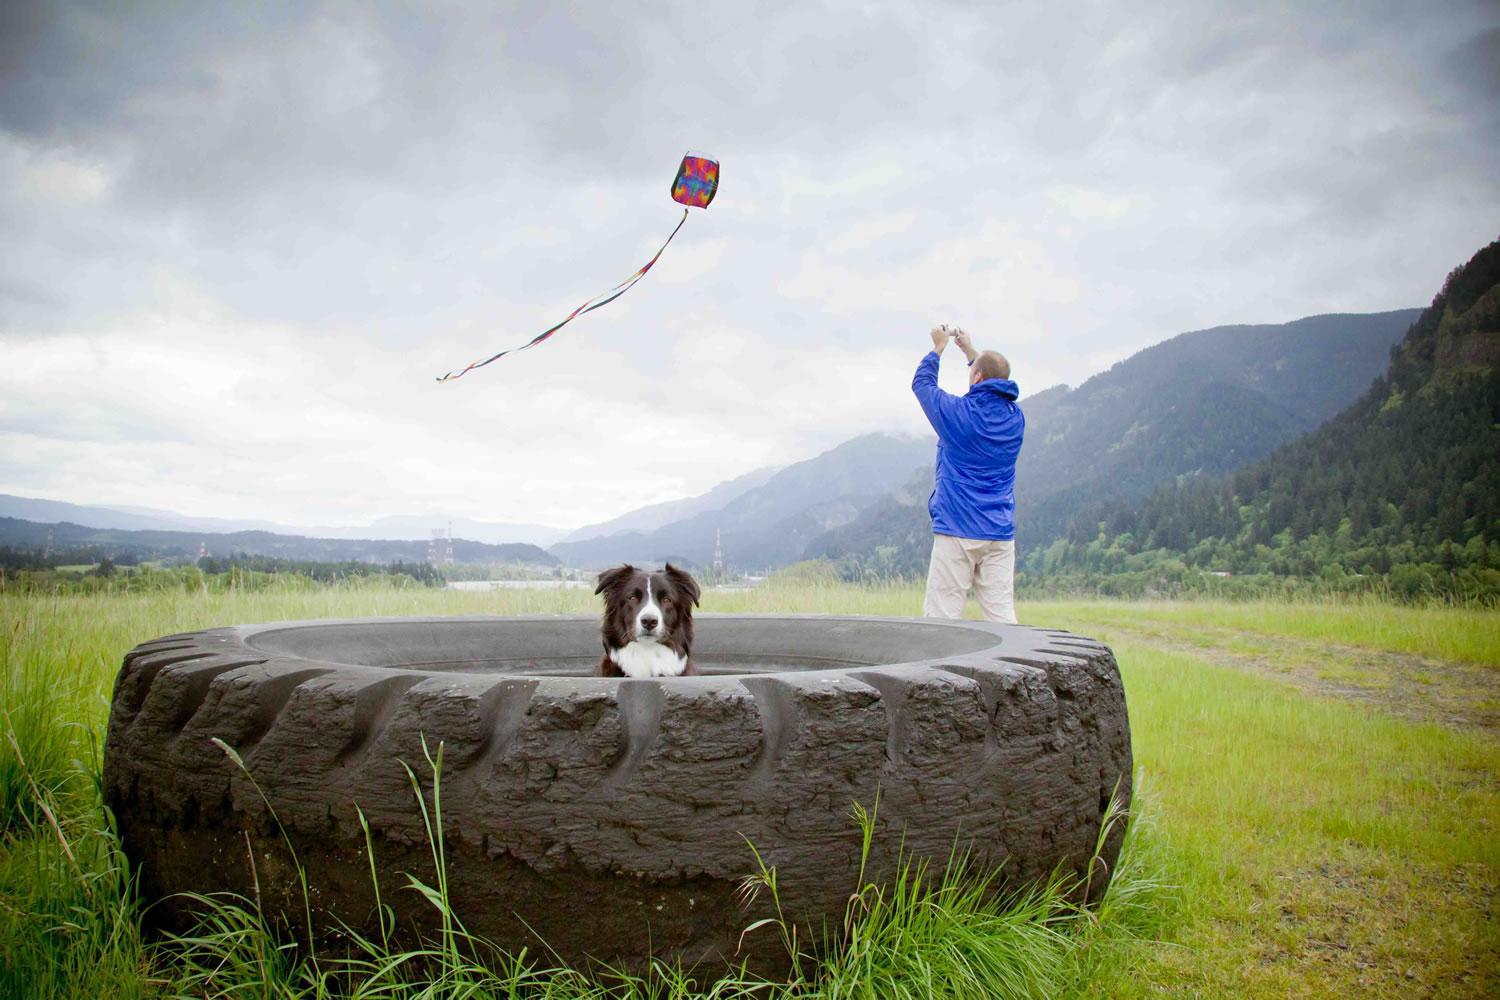 Kirsten Muskat, founder and president of the Camas Camera Club, took this &quot;Family Moment&quot; photo of her husband Richard Kurczak and their border collie Elmo, on Strawberry Island in the Columbia River Gorge, in May 2011. They moved from Tanzania to Camas in 2007. &quot;I looked at this scene before me, and everything had just come together,&quot; Muskat said. &quot;I could feel this image before I took it.